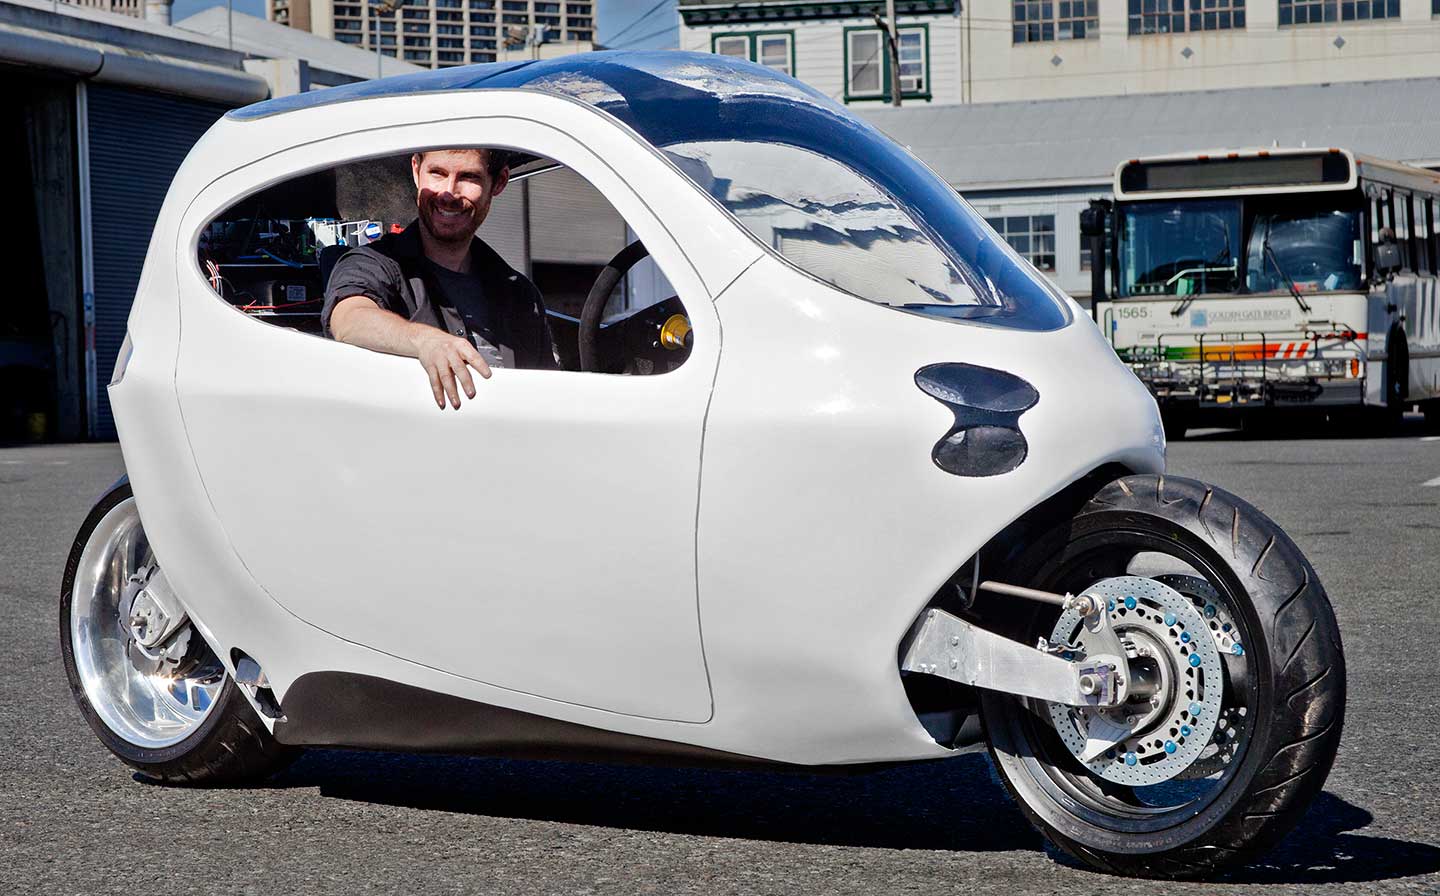 C-1 electric vehicle from Lit Motors.